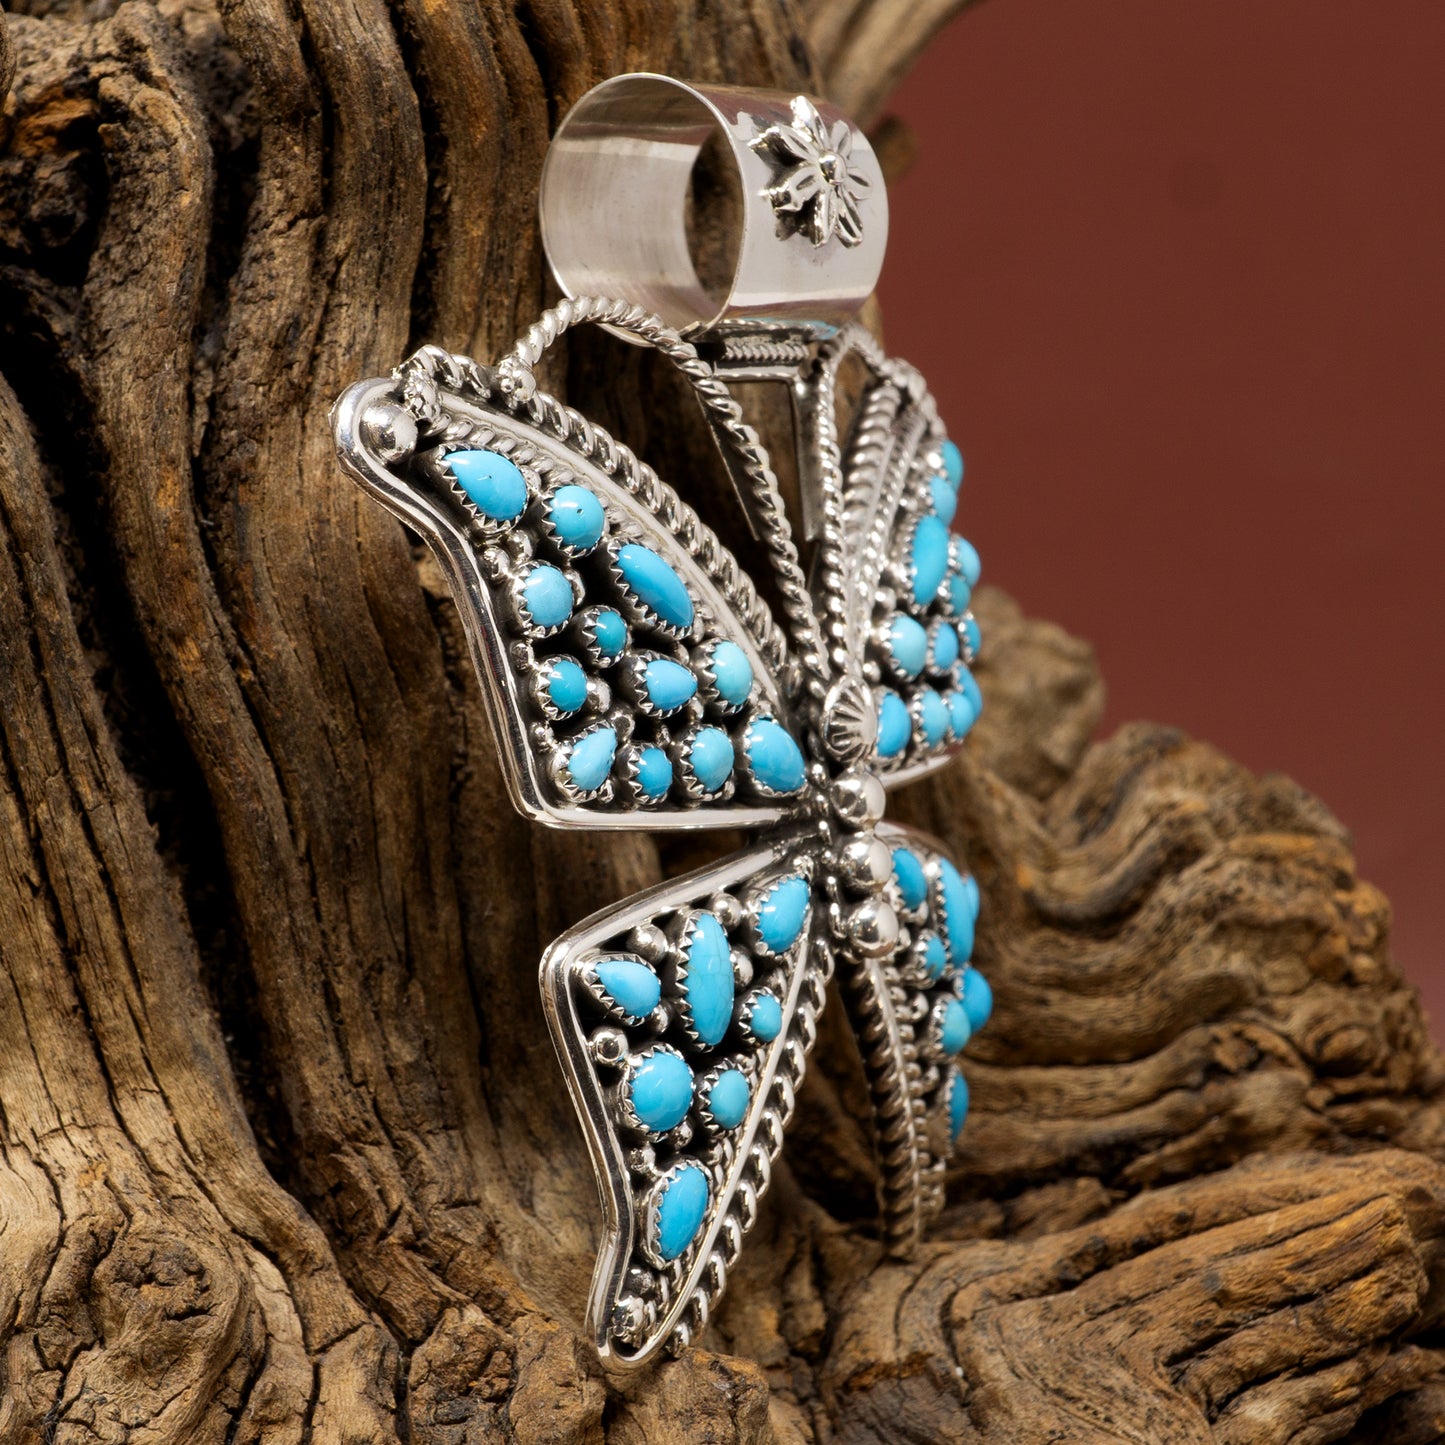 Silver Butterfly Pendant with Sleeping Beauty Turquoise Mini Cabochons